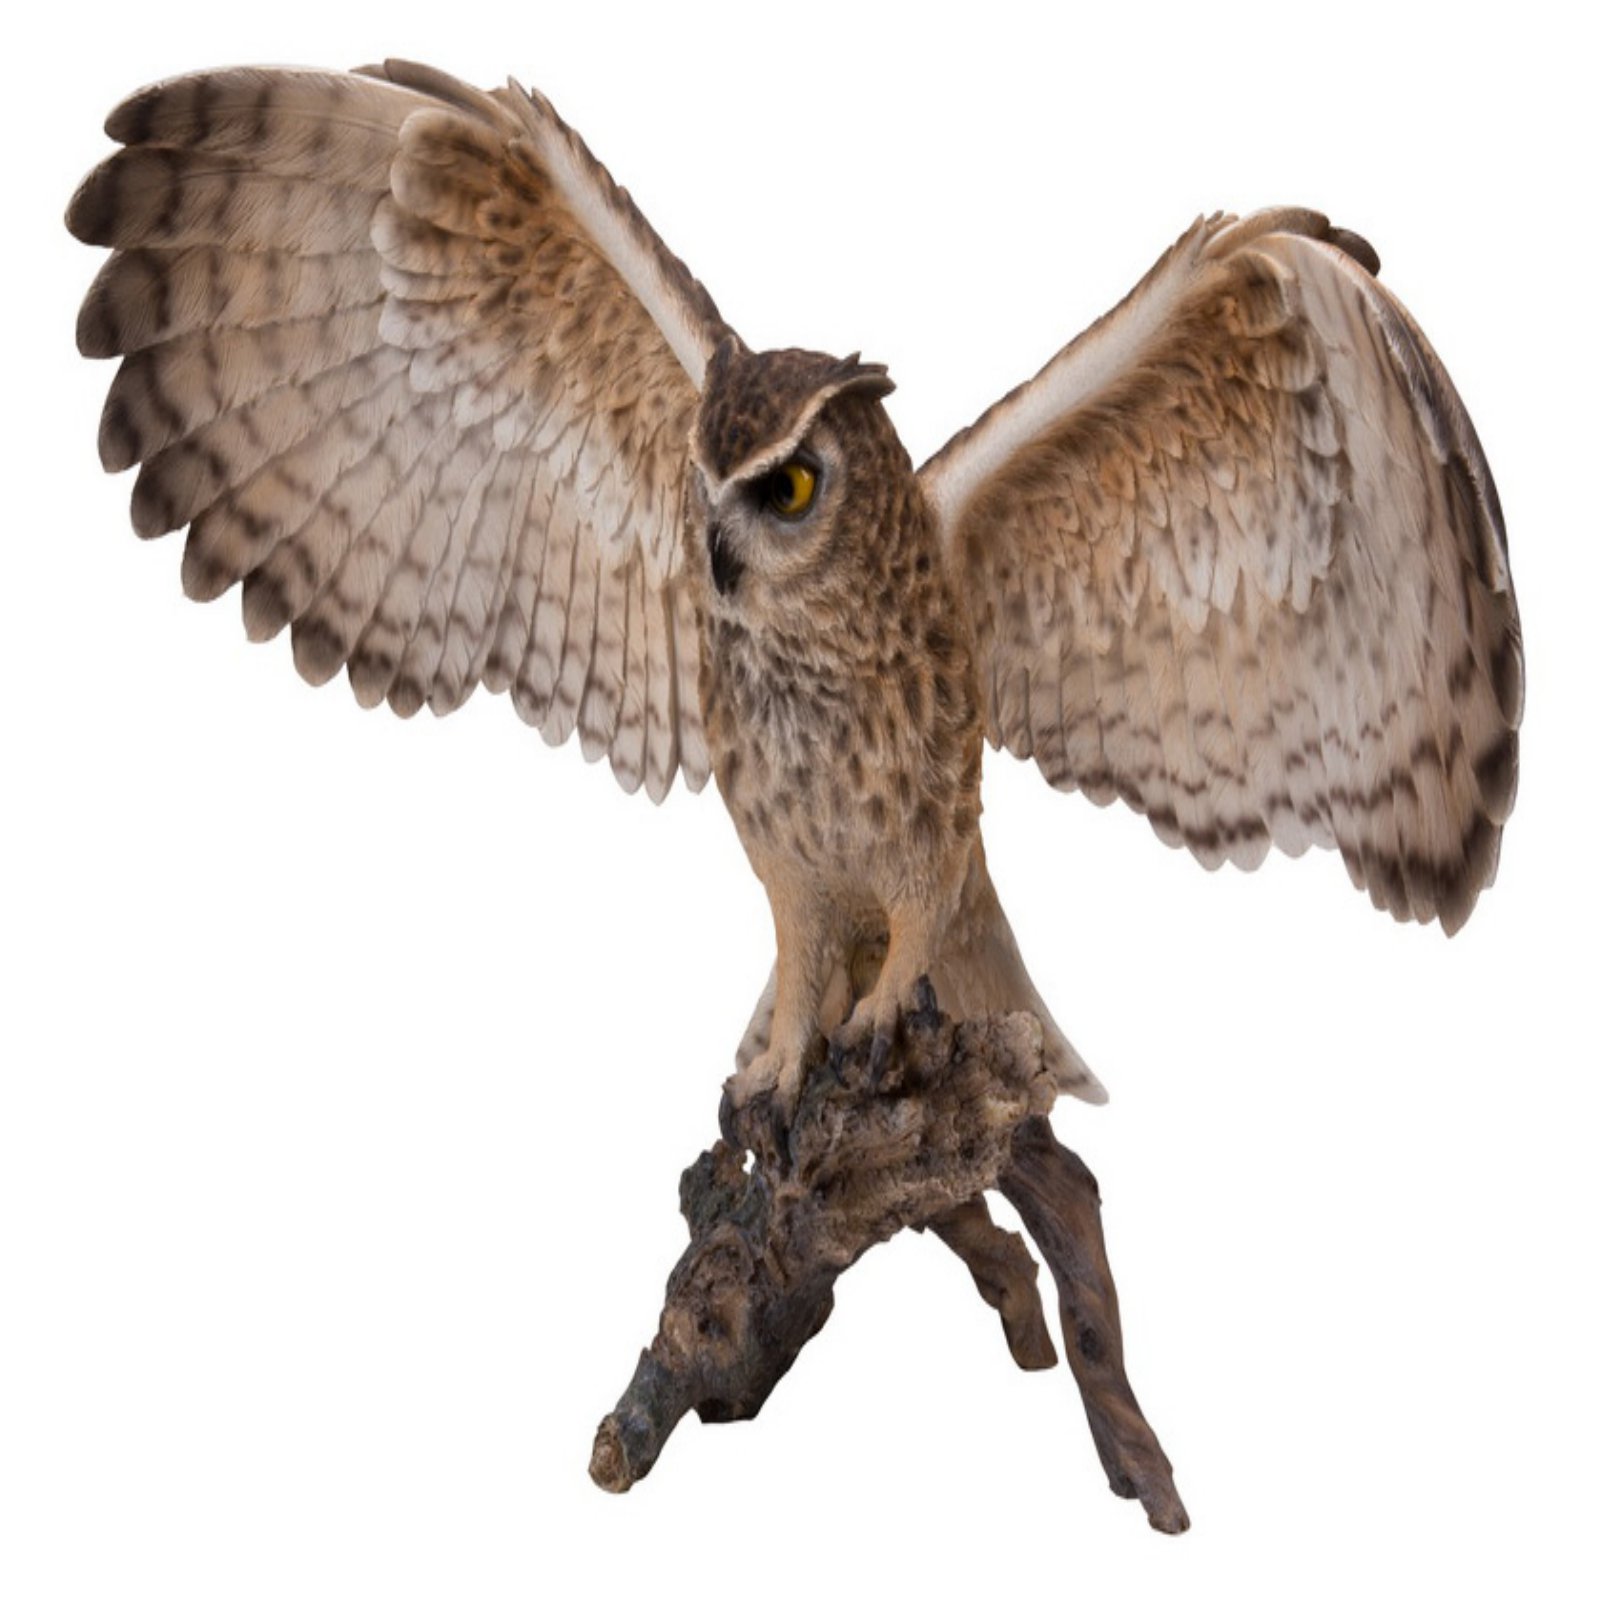 HI-LINE GIFT LTD. EAGLE OWL ON BRANCH W/WINGS OUT - image 5 of 5